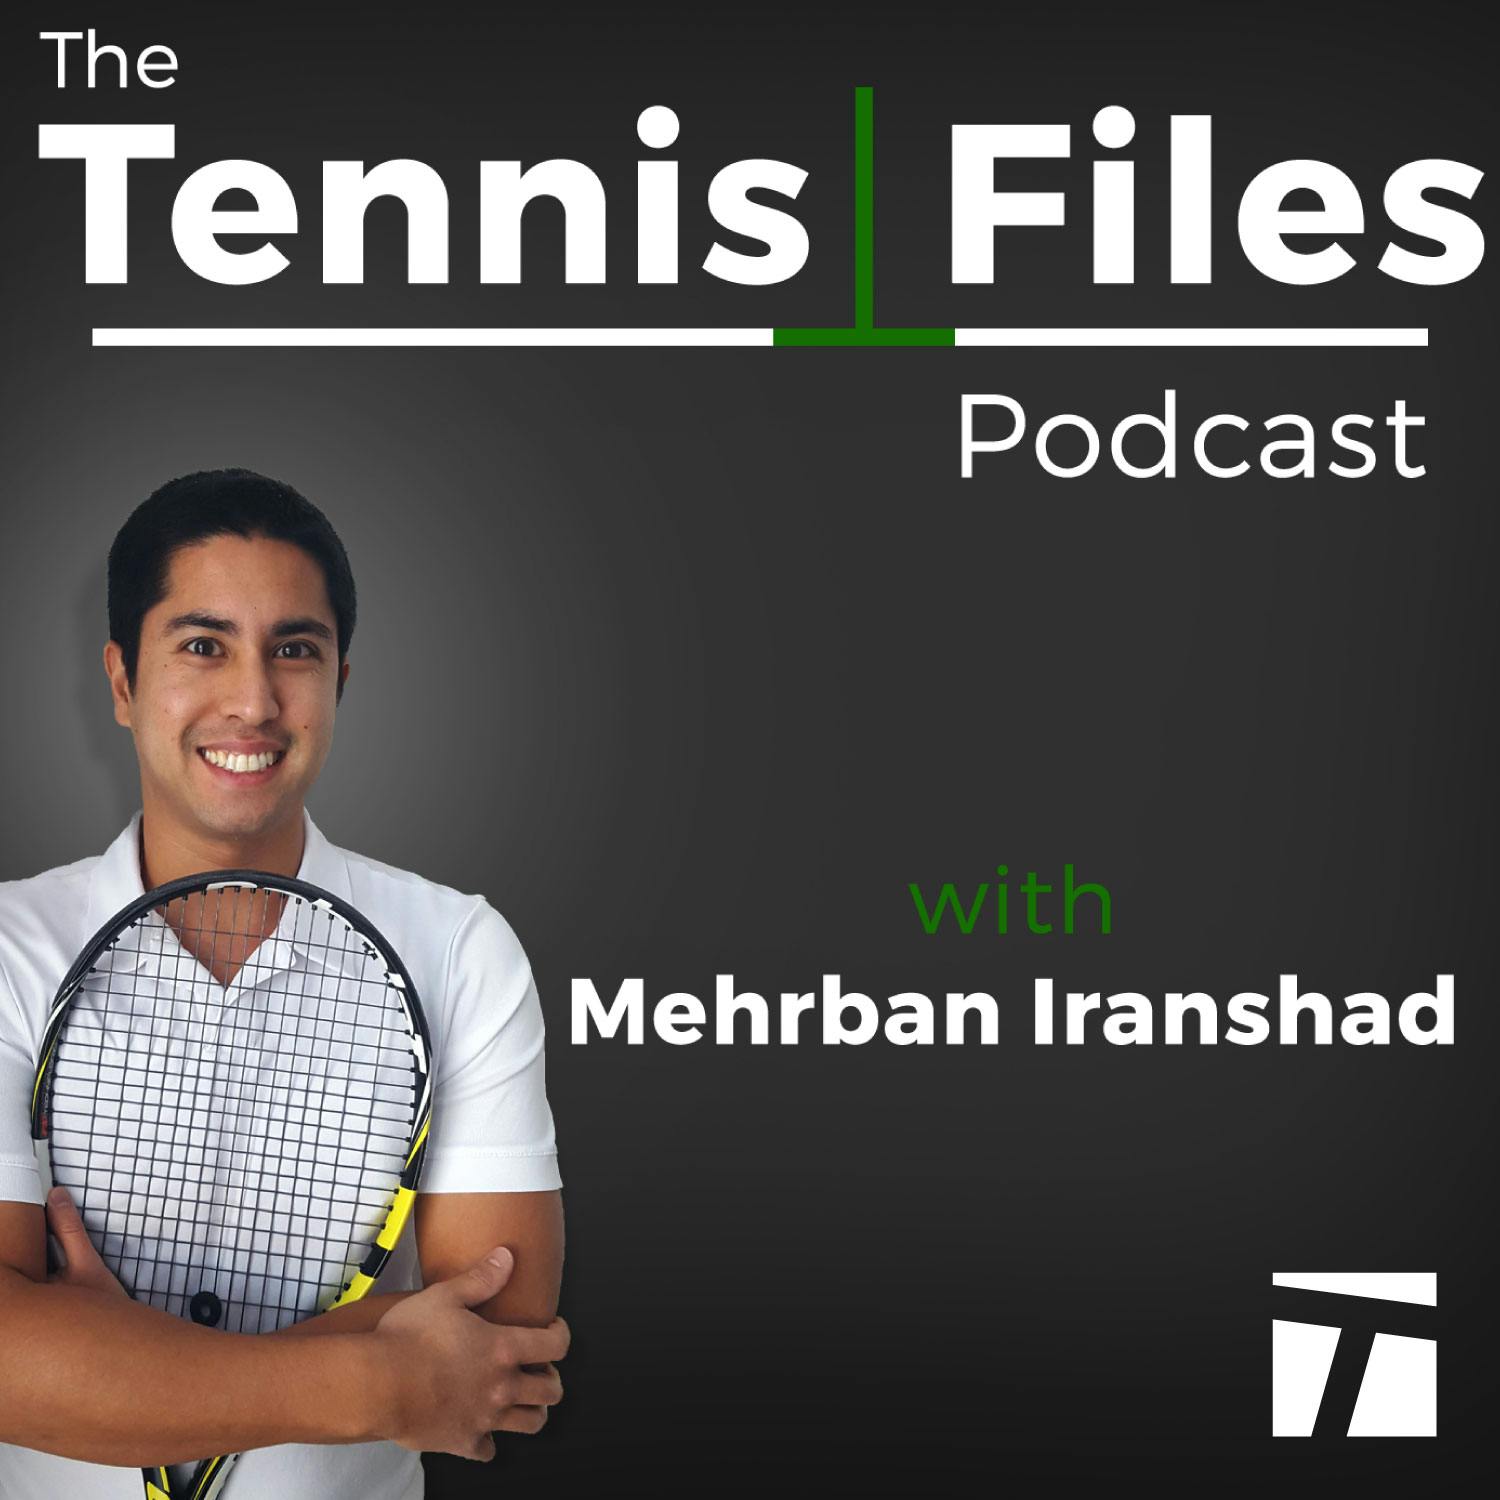 TFP 339: Q&A Edition - Forehand Power, Second Serve Consistency, Concentration Tips, and More – From the 2021 archives